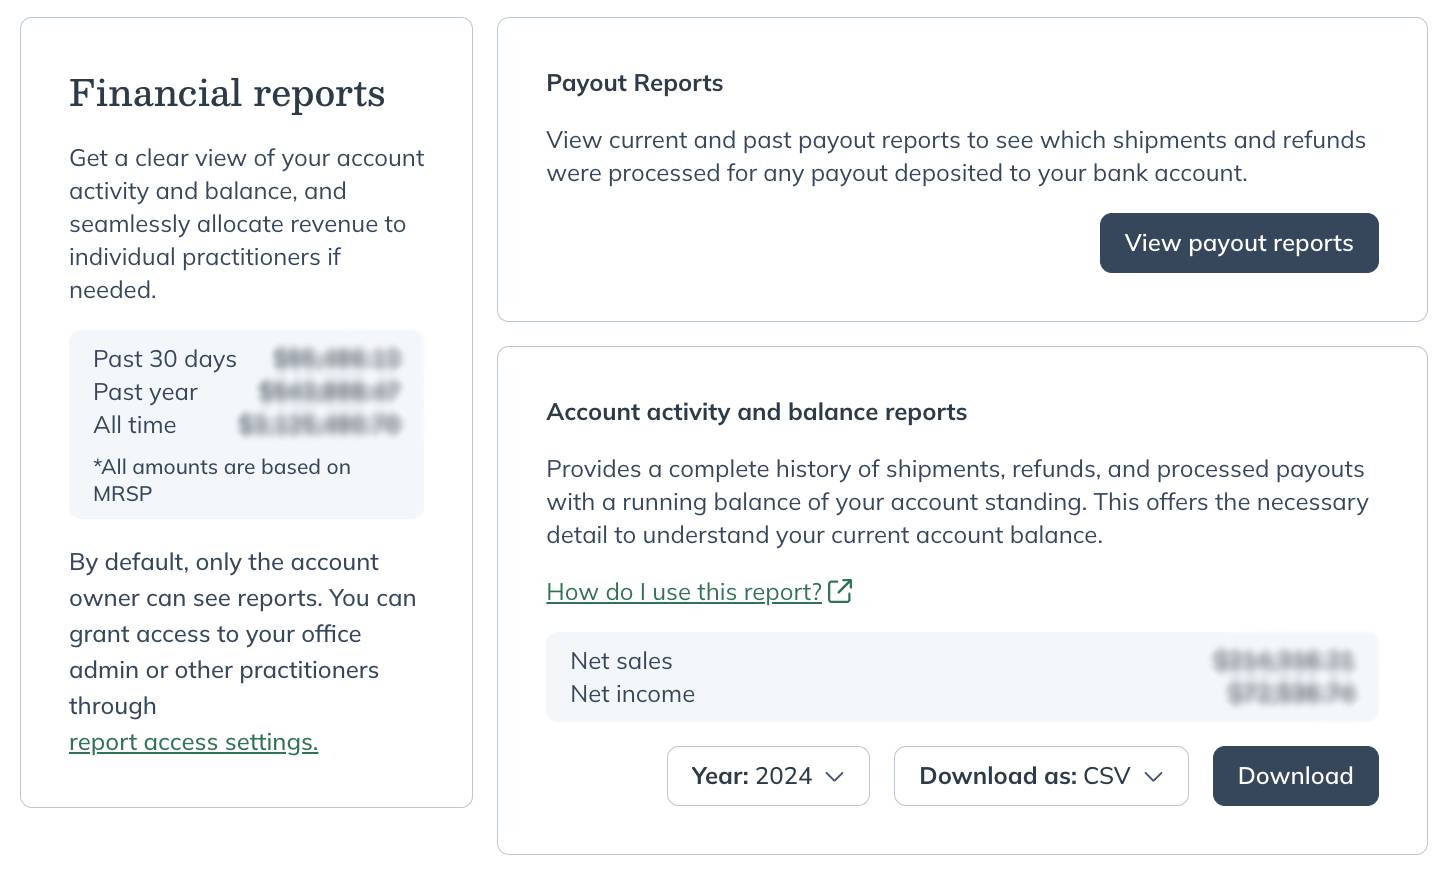 The Financial reports page